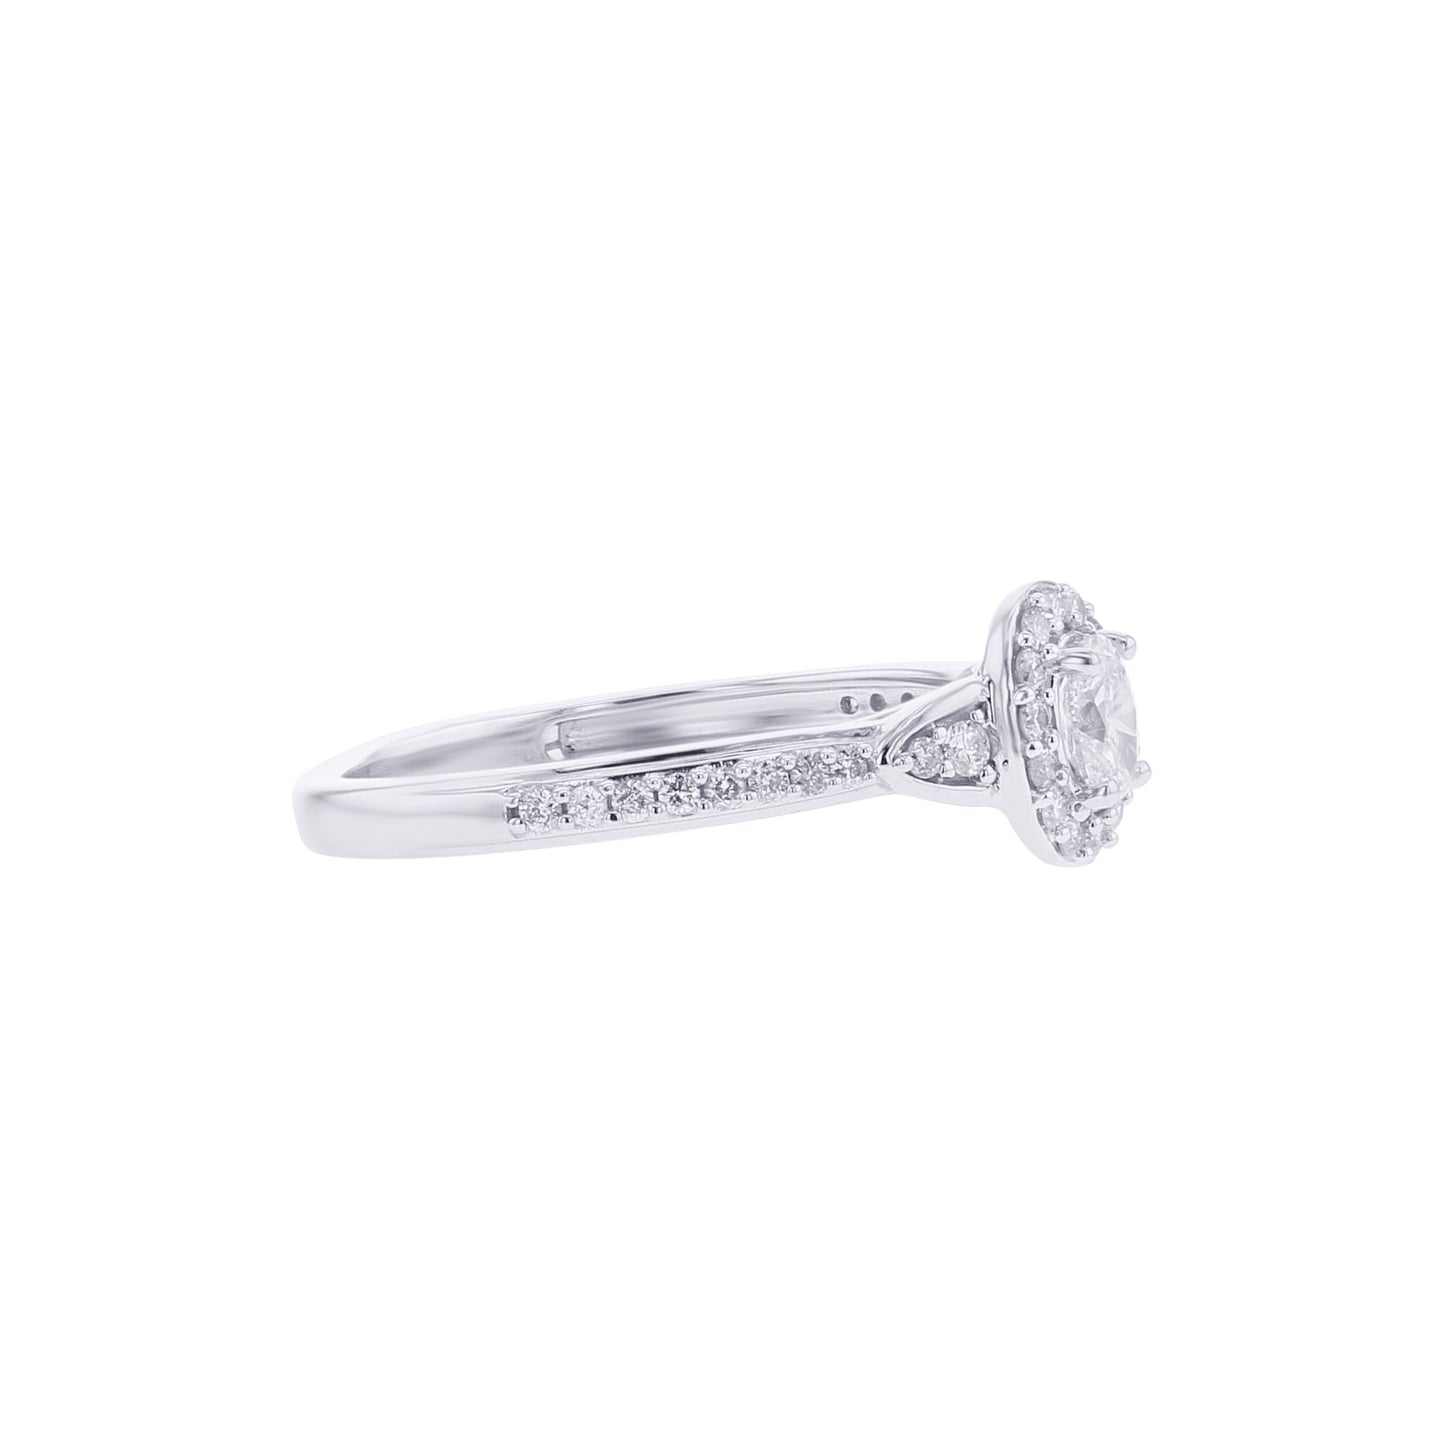 Paola Oval Halo Ready for Love Diamond Engagement Ring